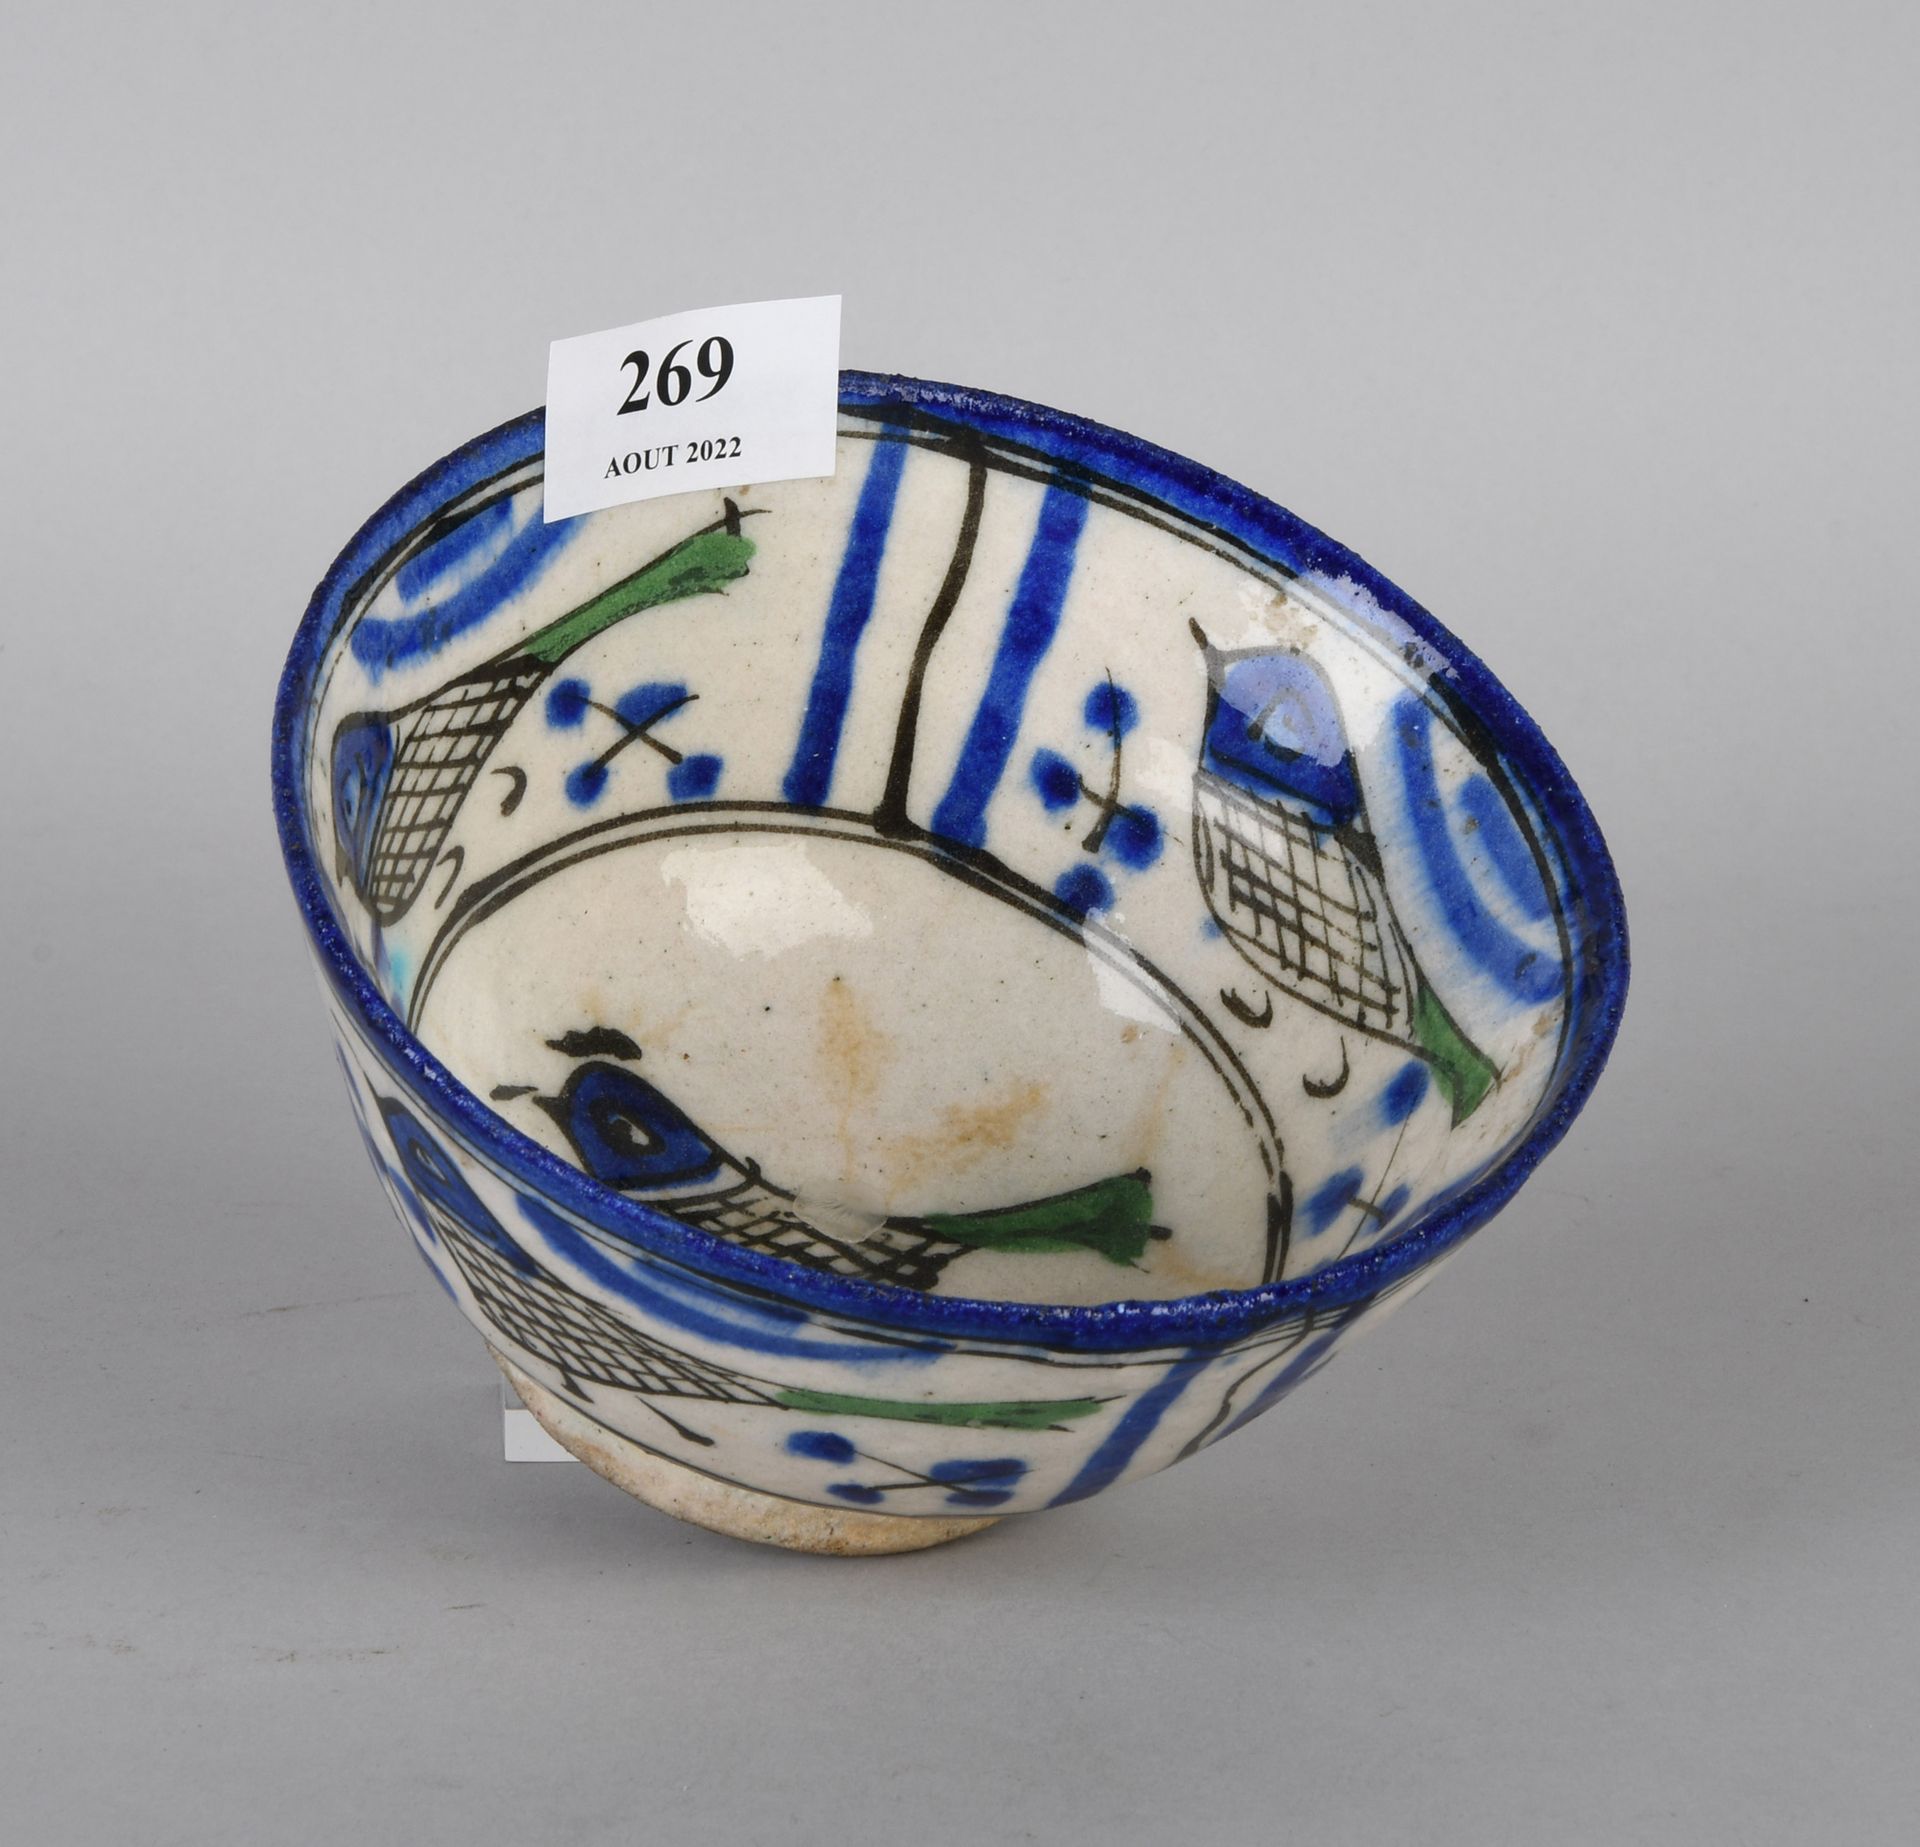 Null 18th century polychrome porcelain bowl with birds decoration

Diameter : 14&hellip;